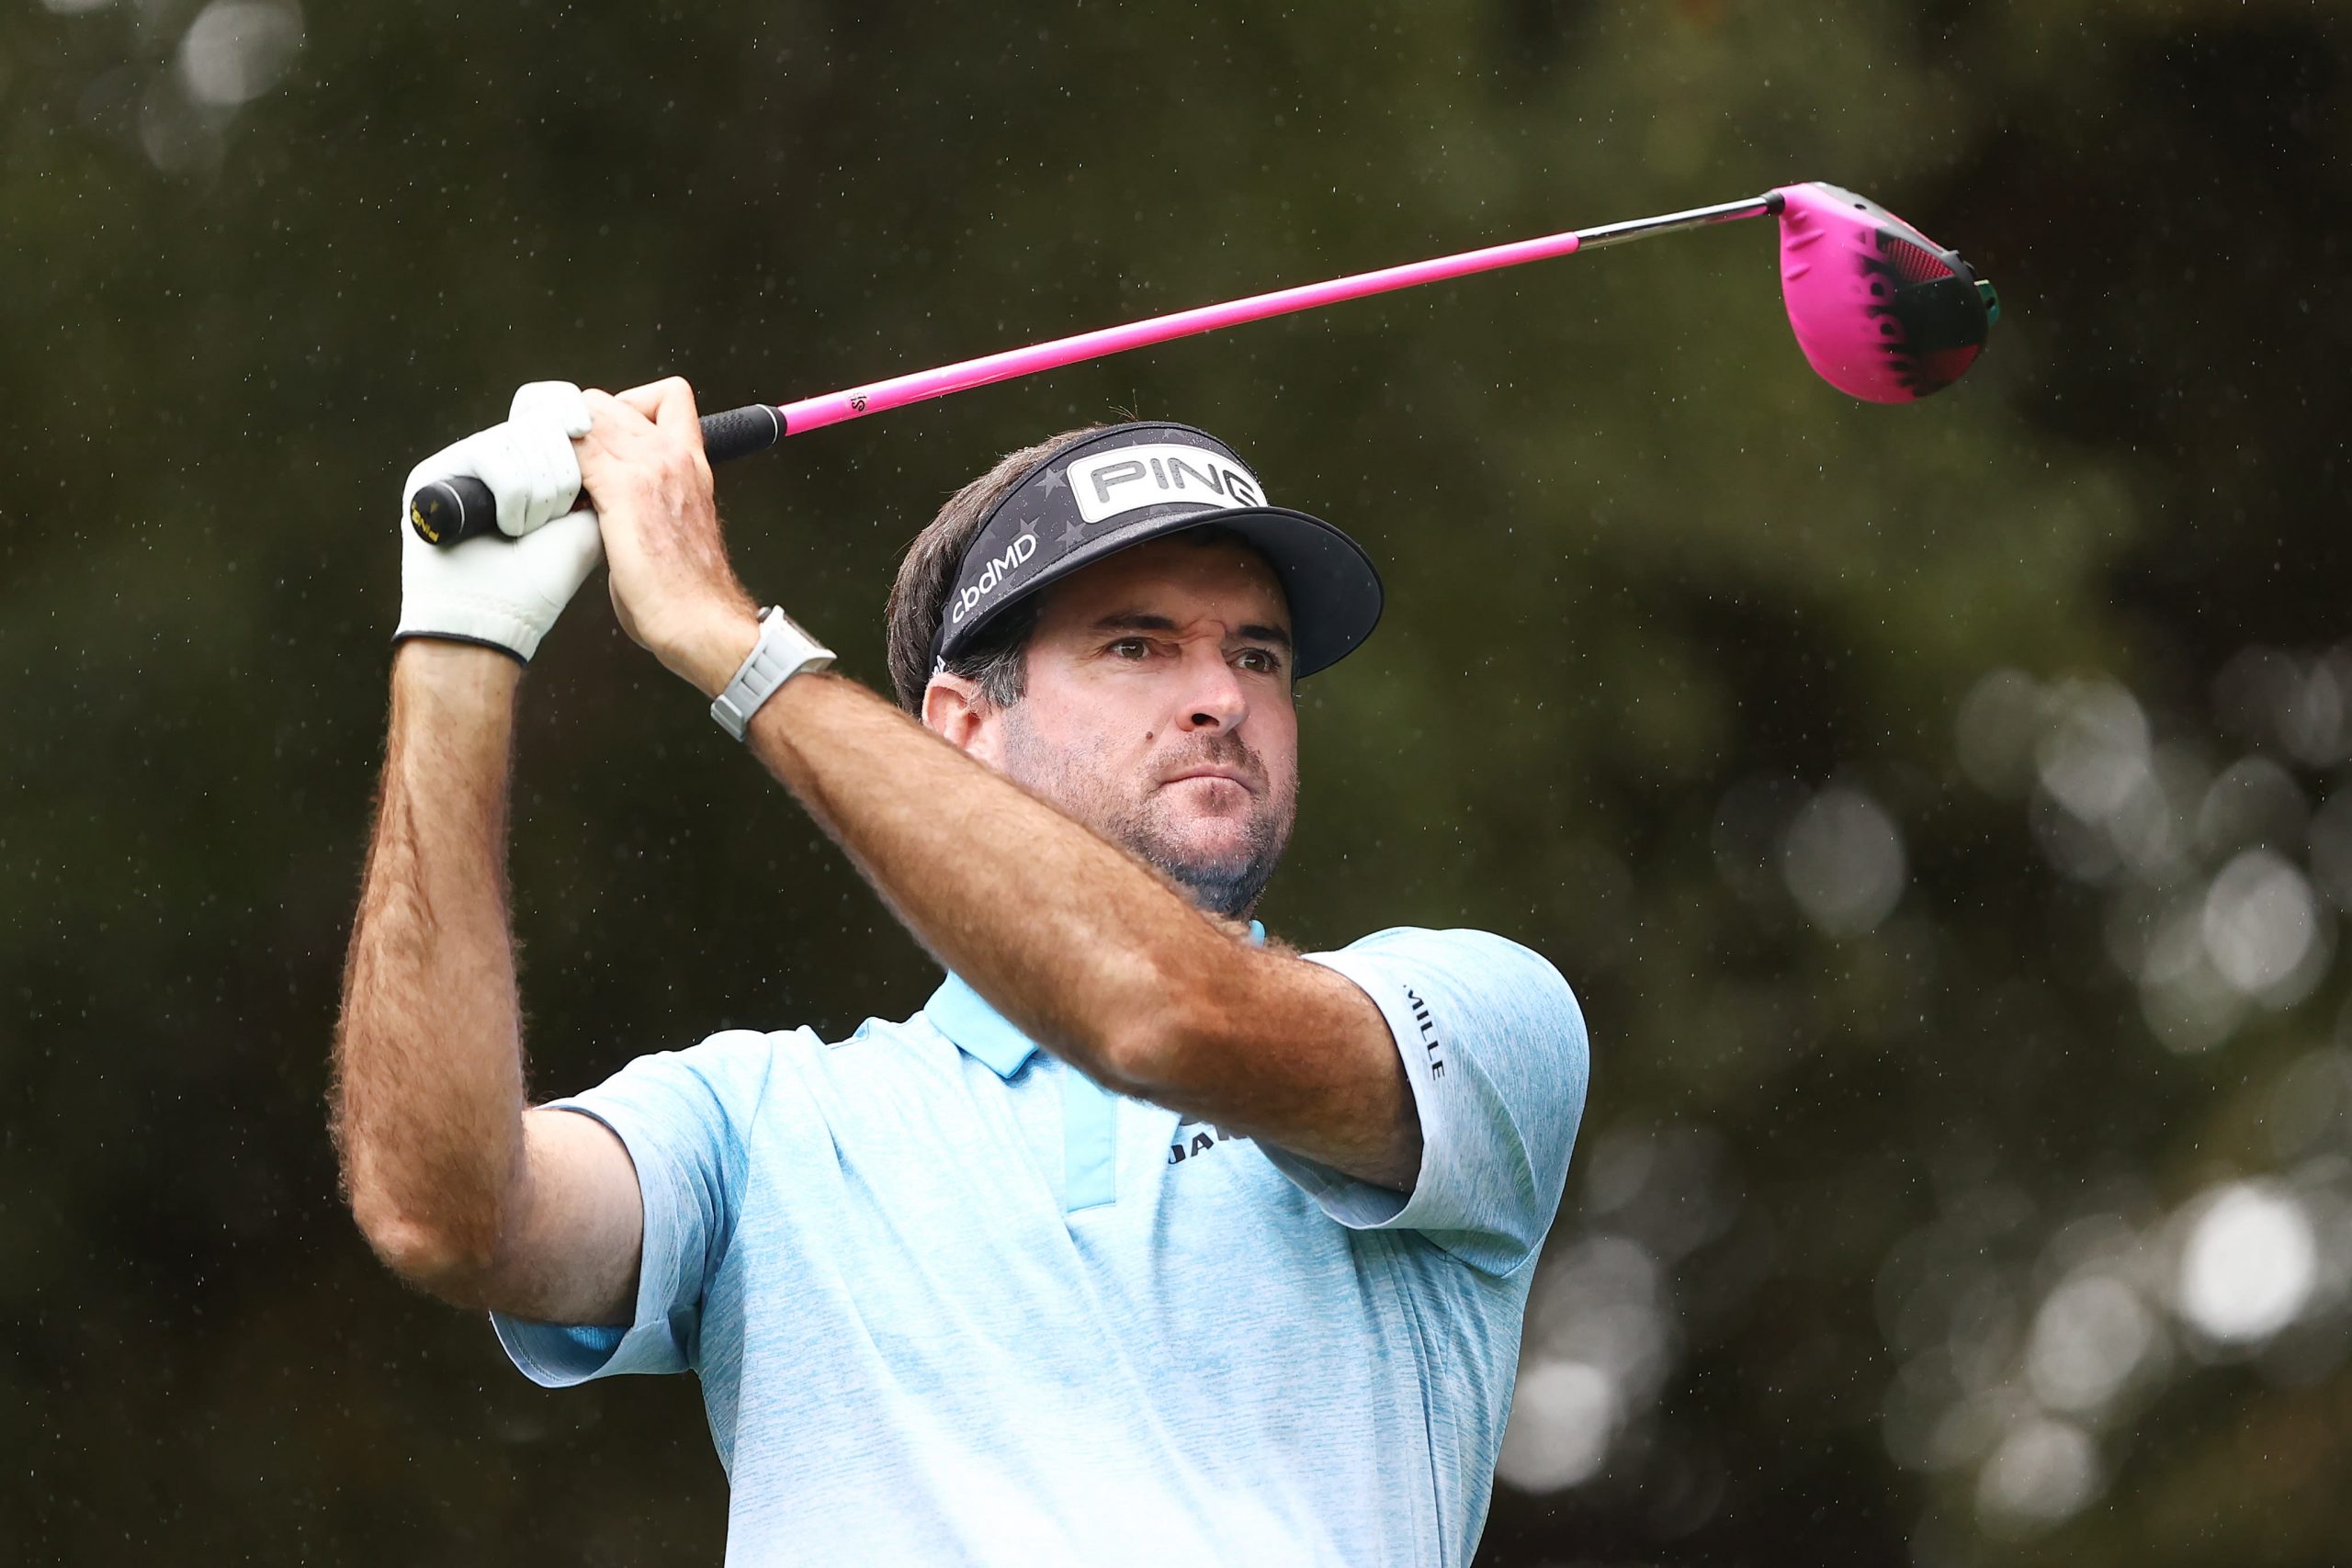 Bubba Watson says he's ready to weather the stress of 2020 and beat Masters

